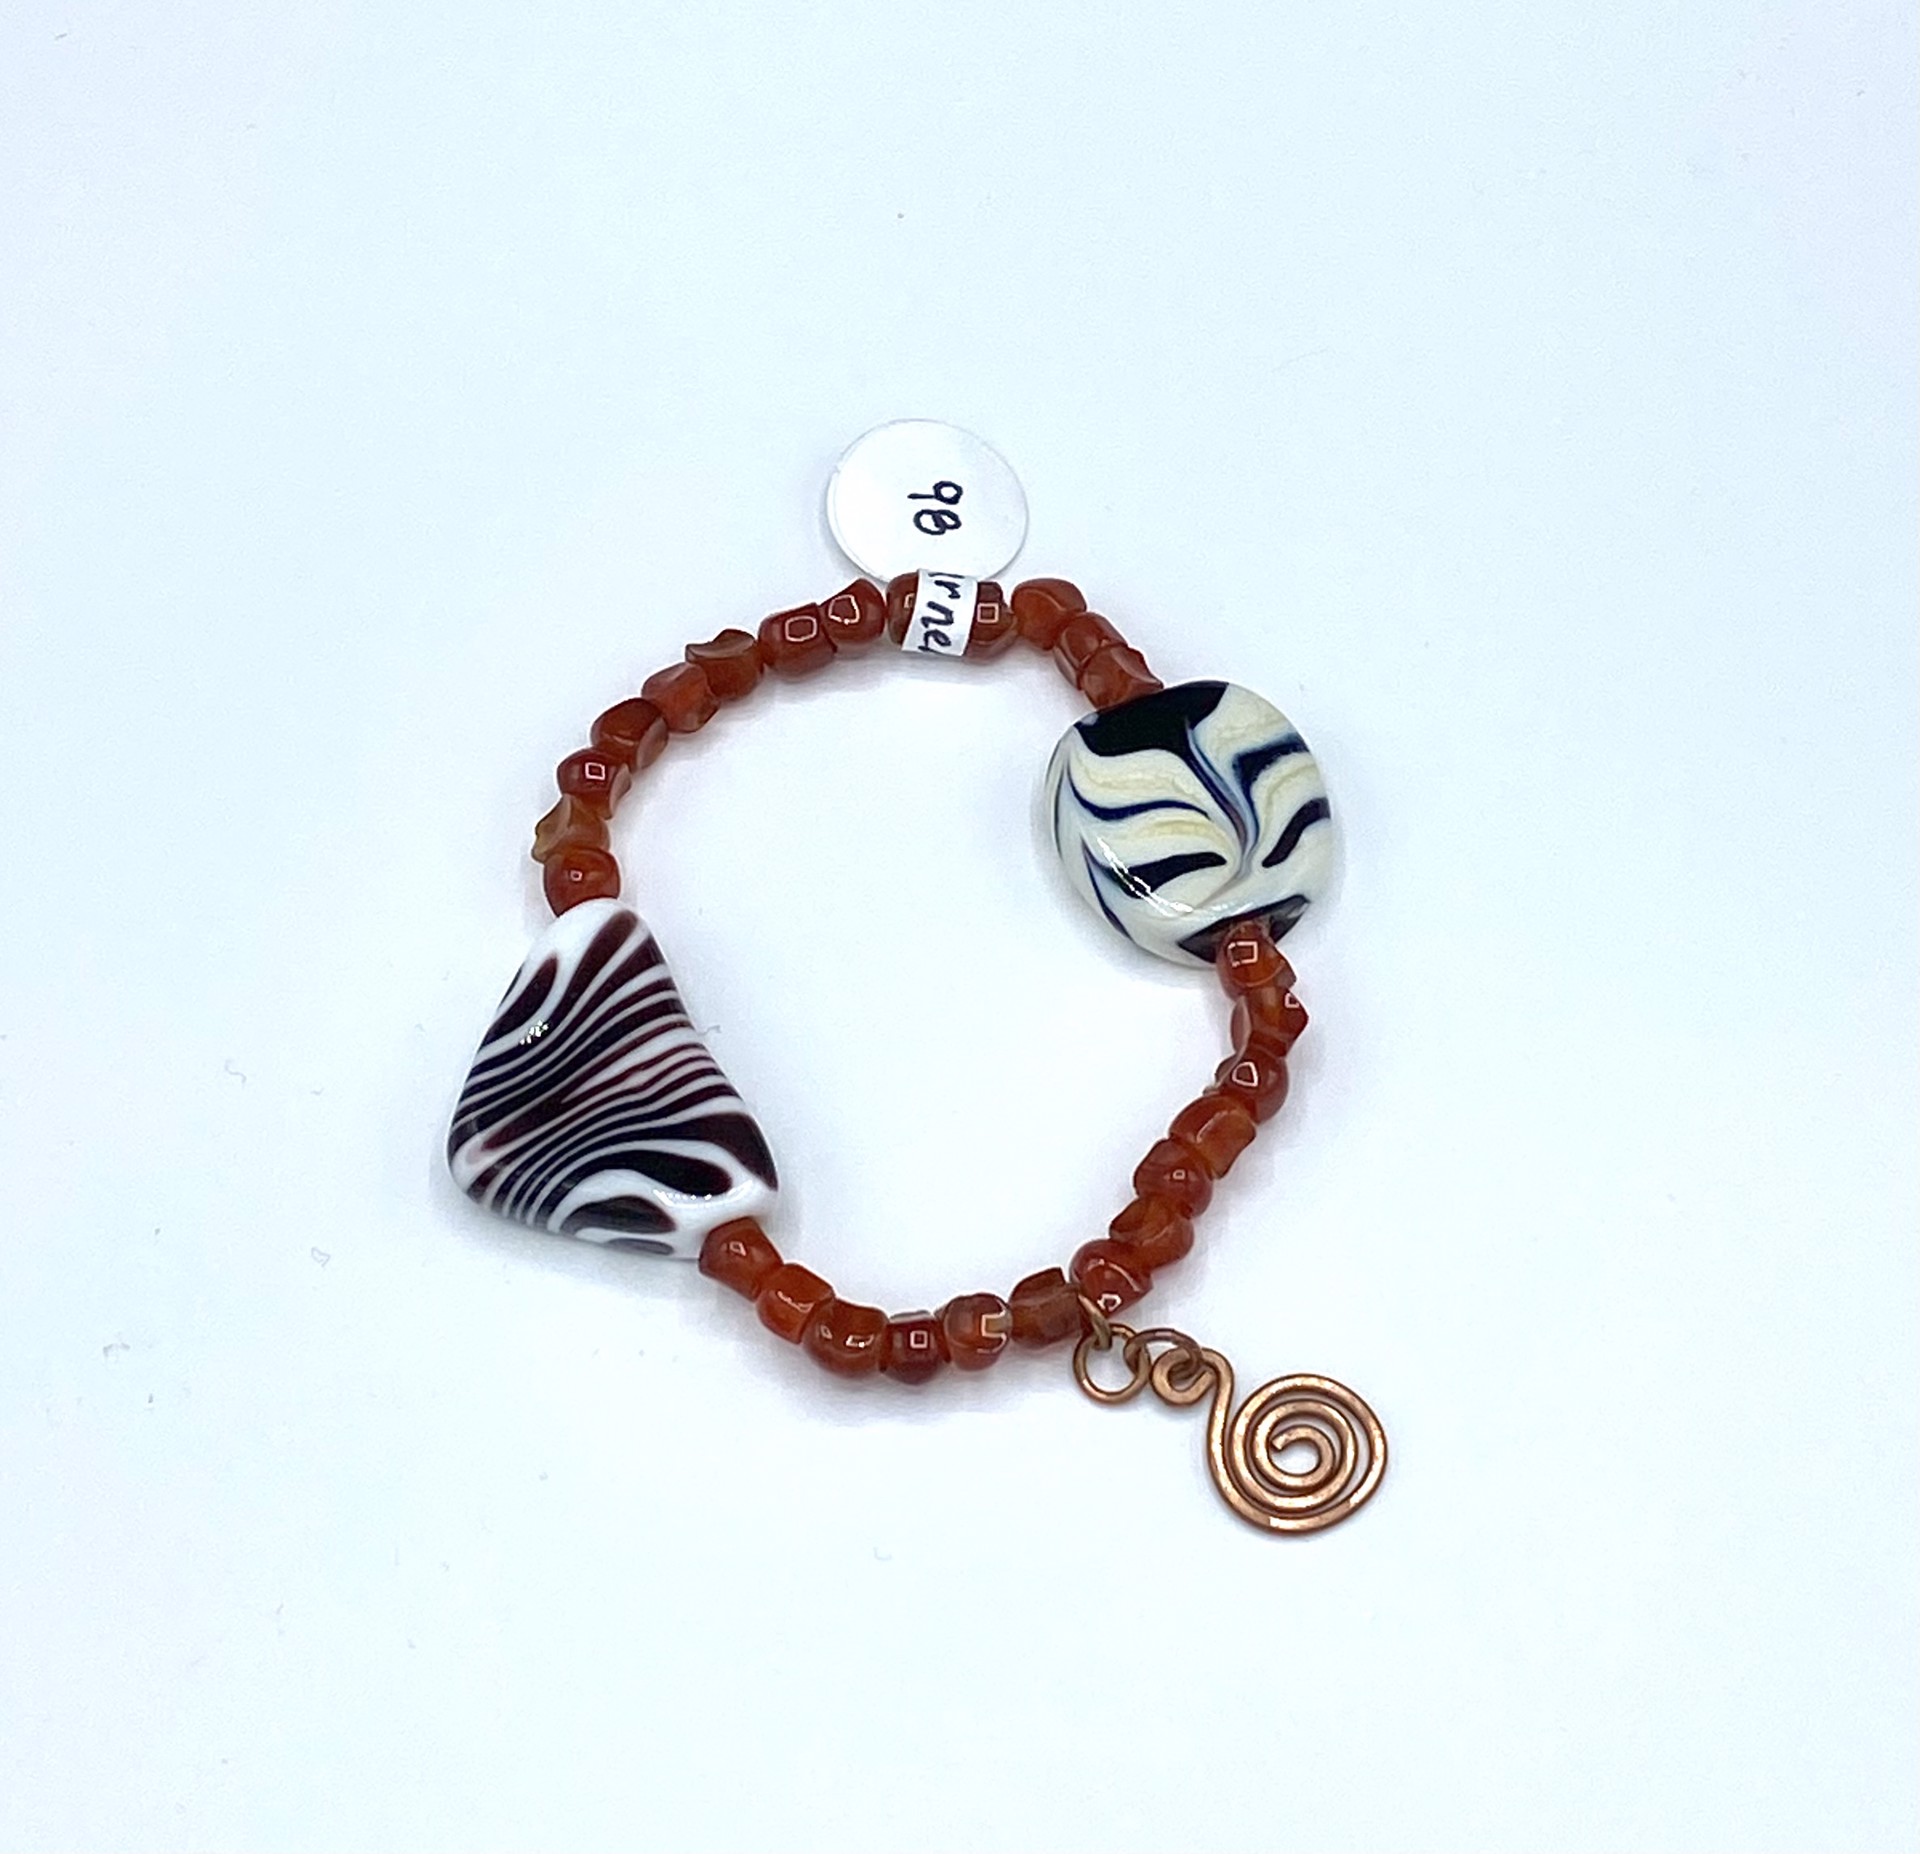 Carnelian with Black and White Gravity Triangle Bead Bracelet by Emelie Hebert